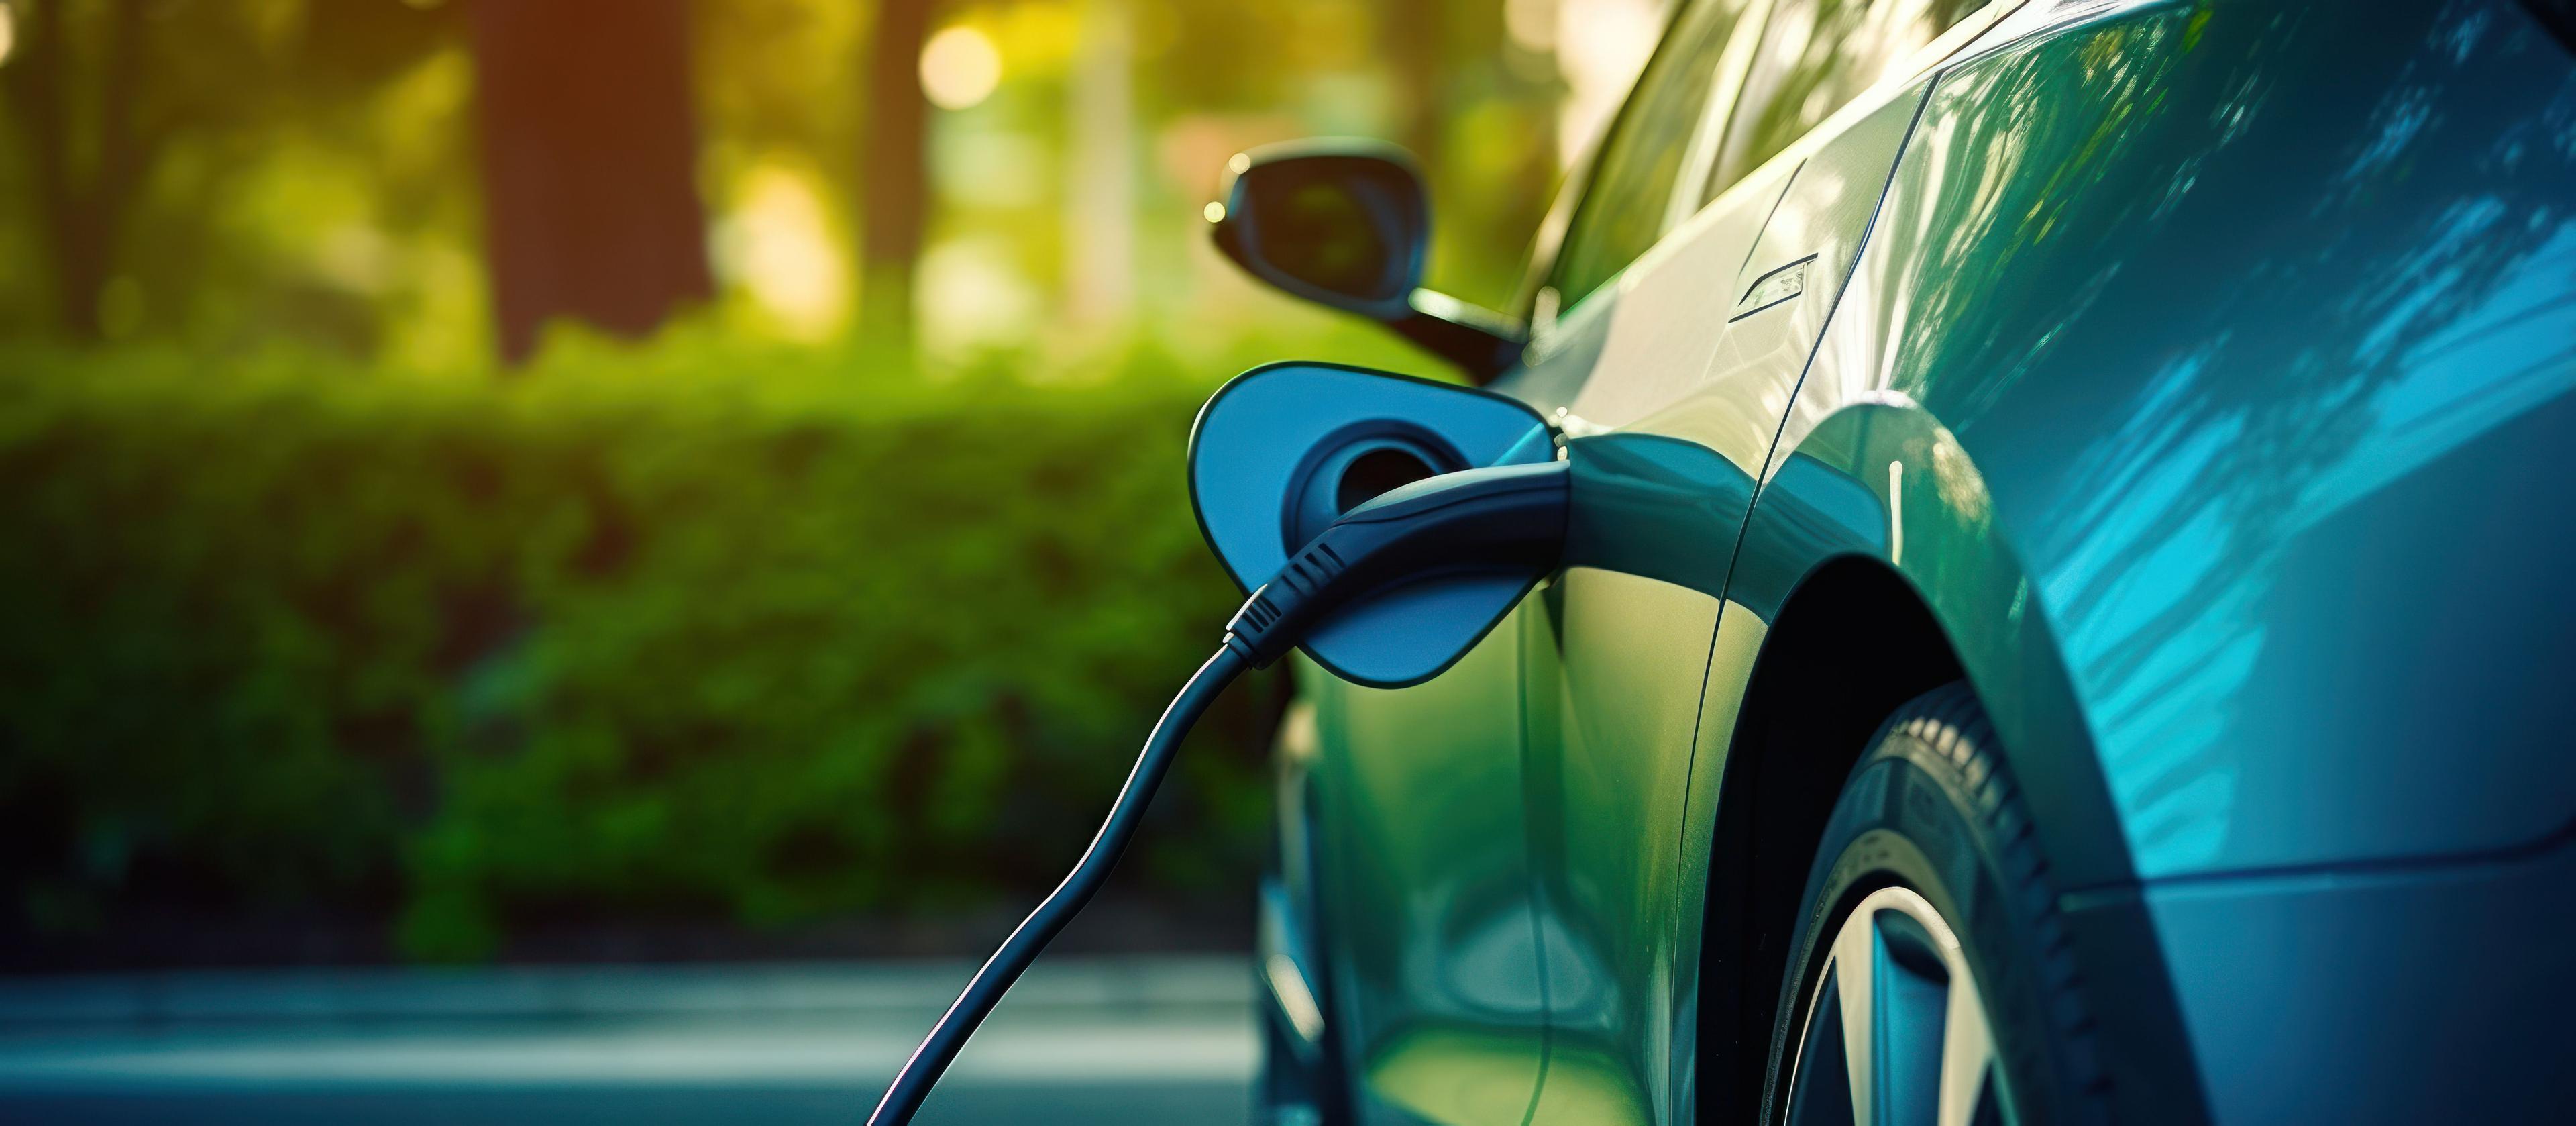 EV Charge Card Solutions for Businesses 